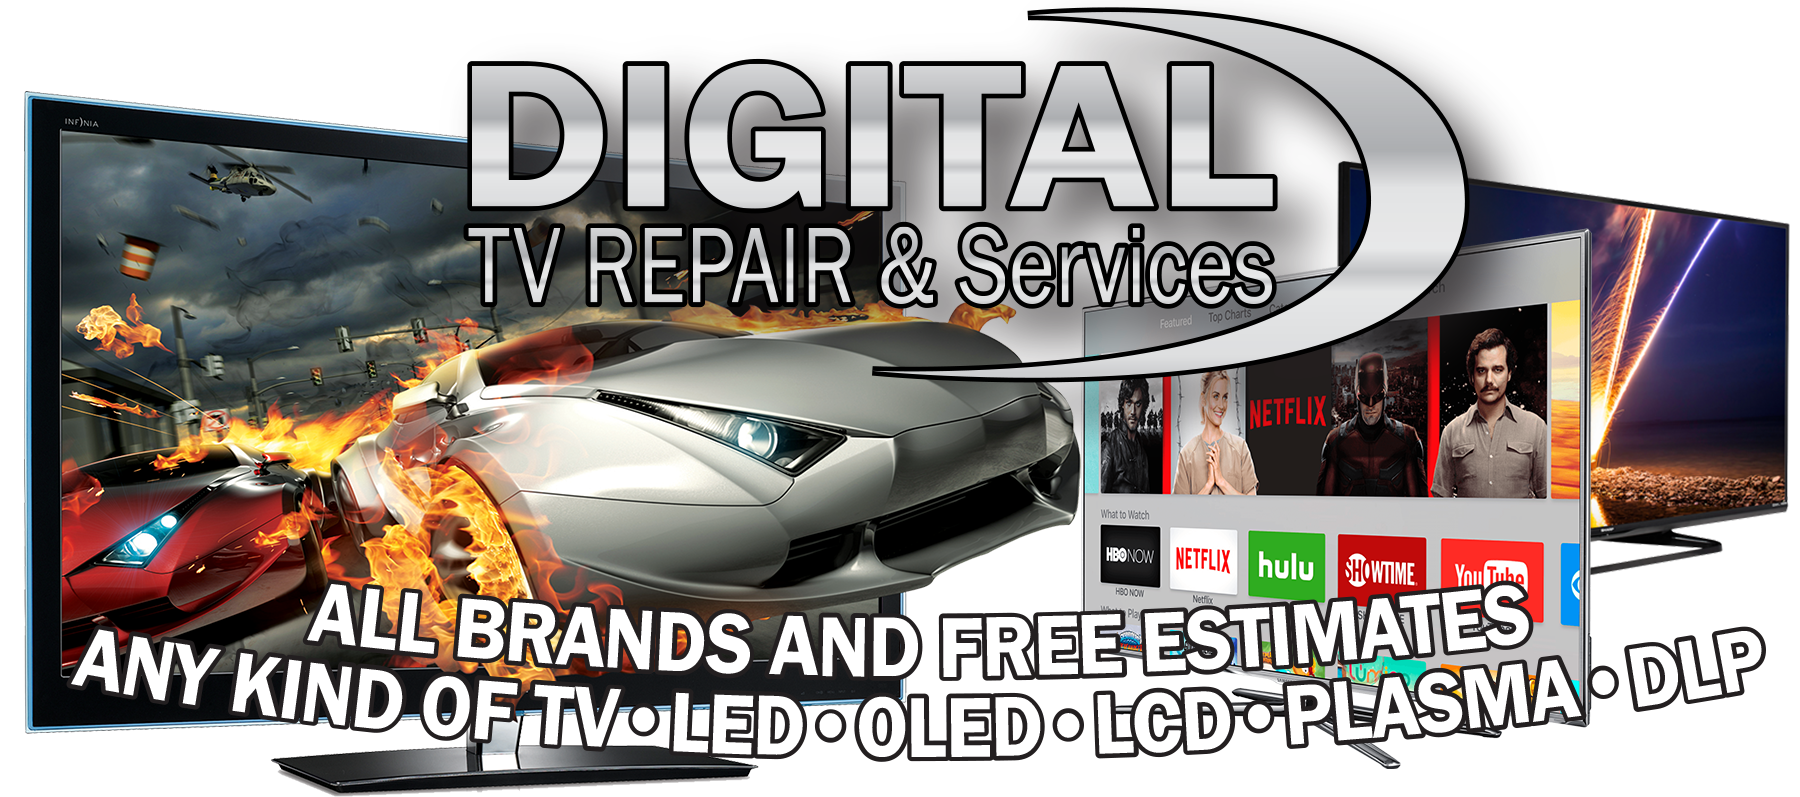 Digital TV Repair and Services - home